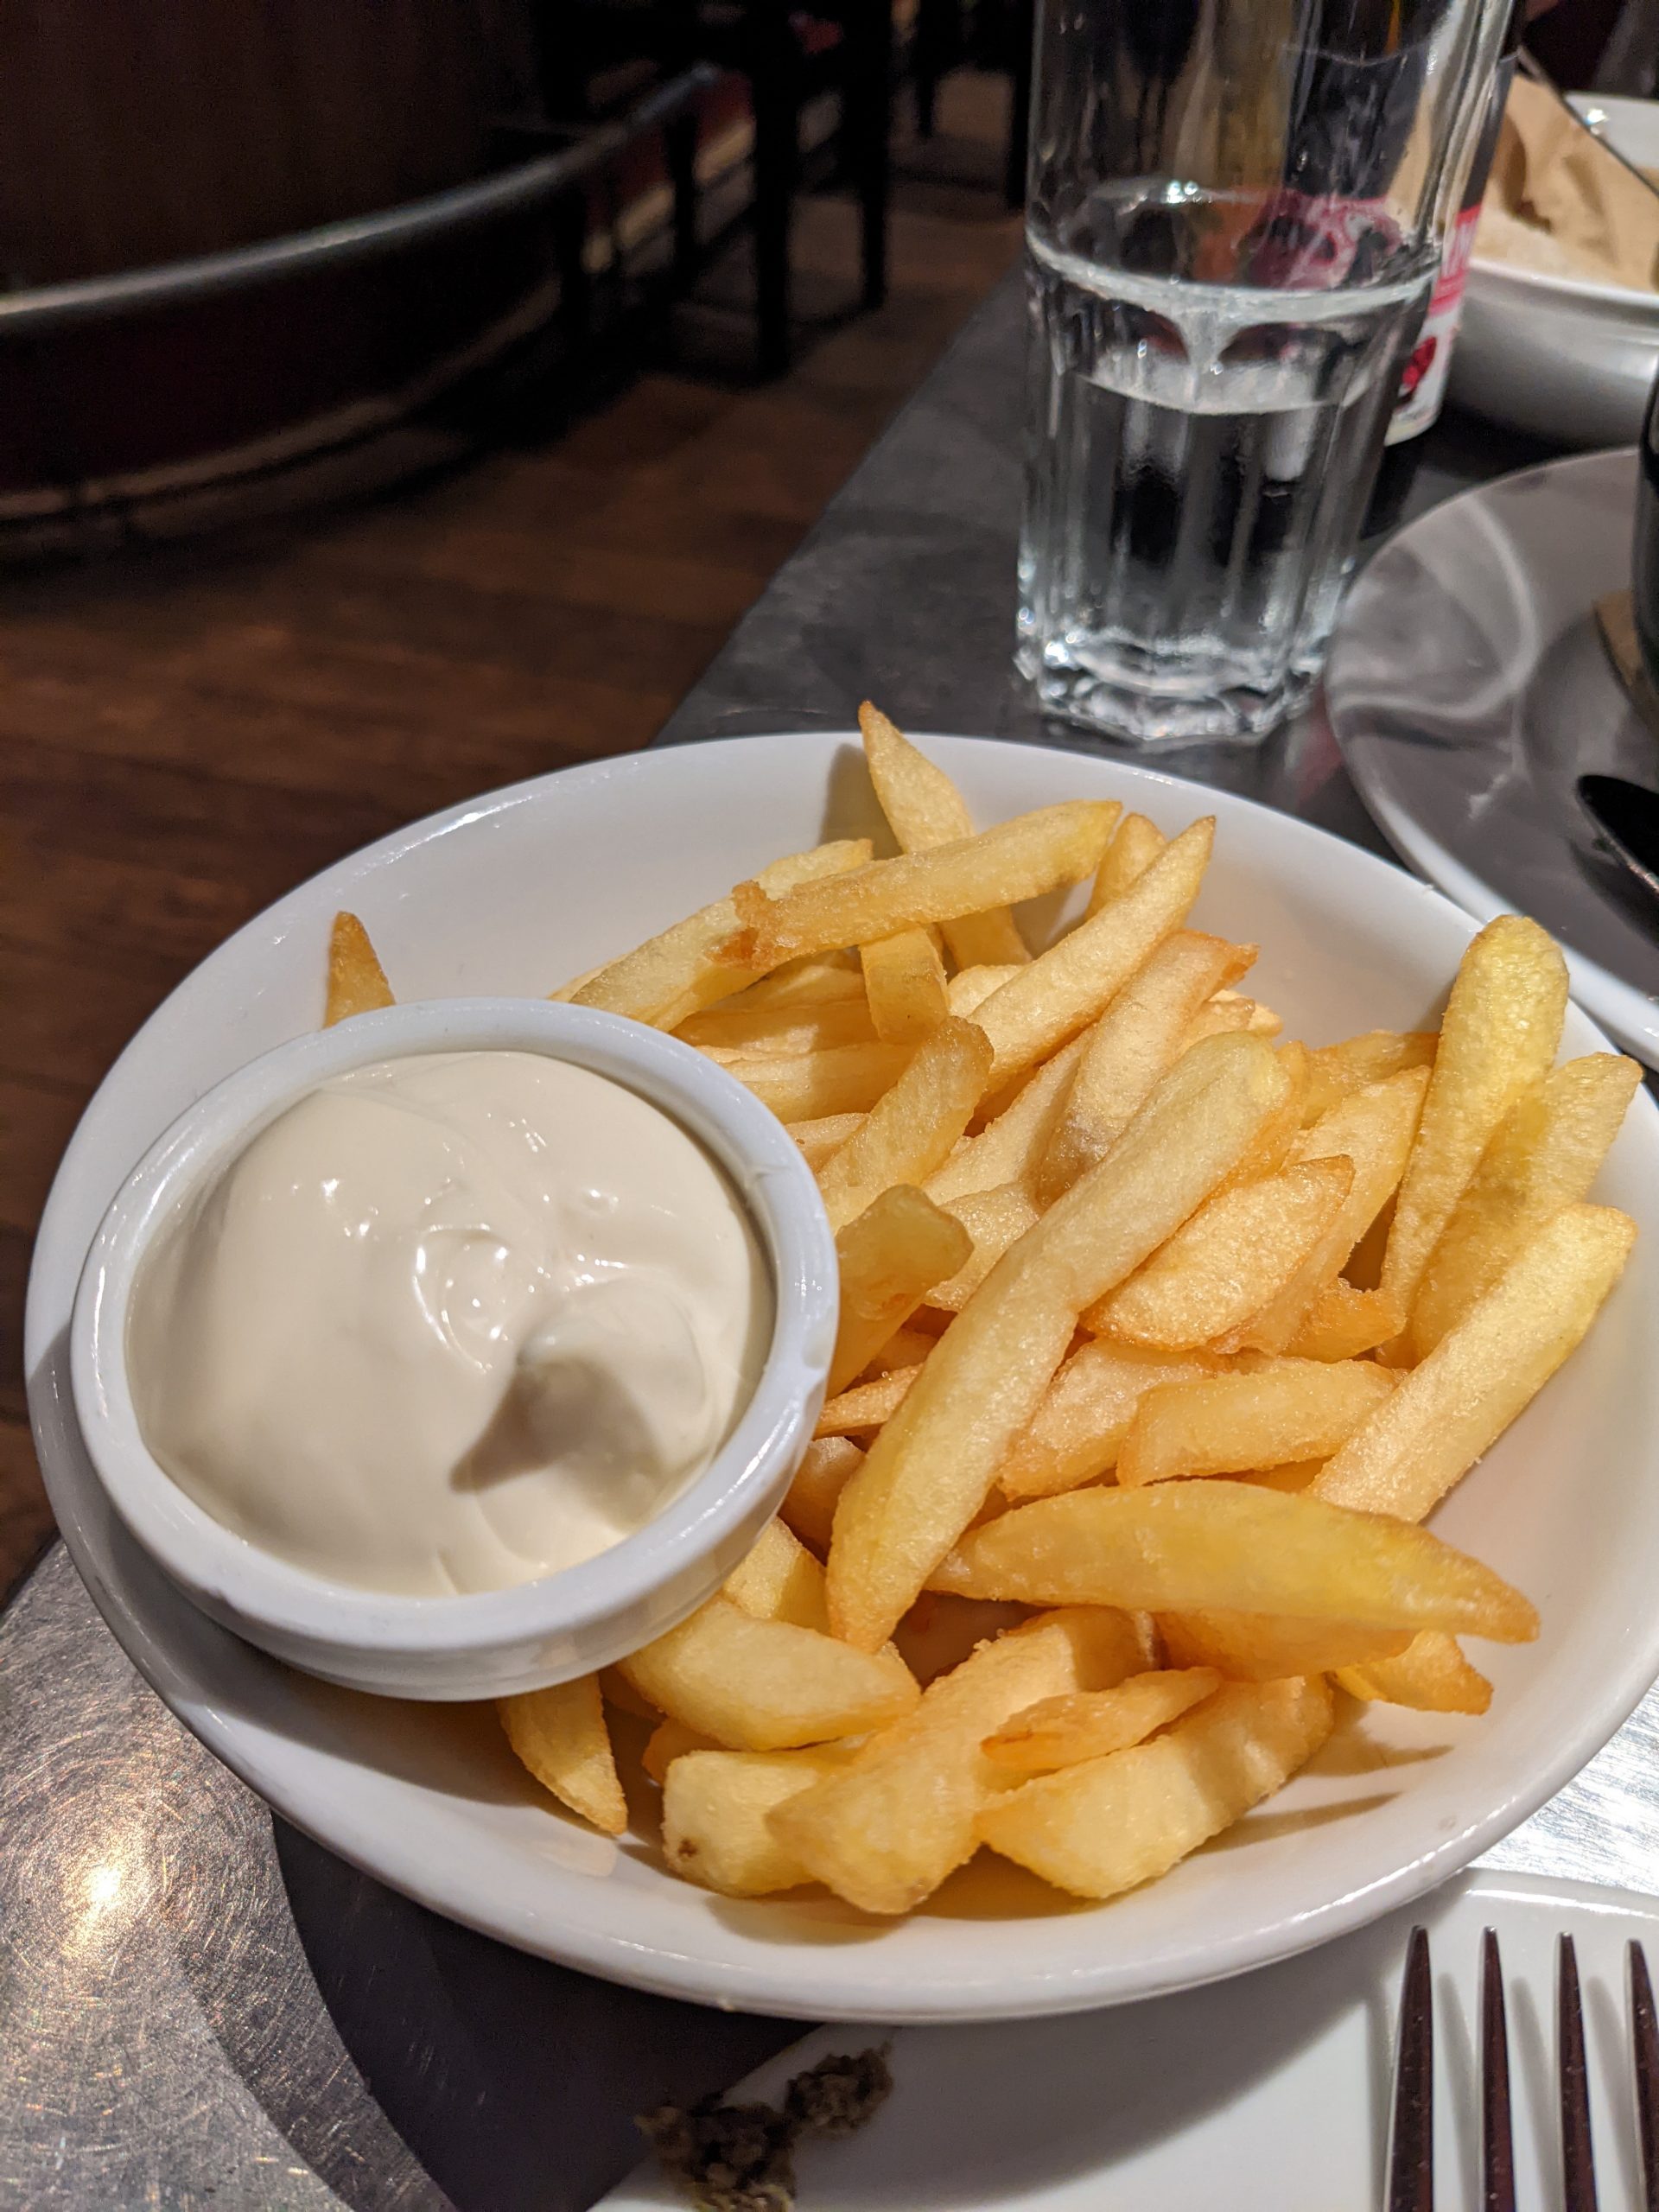 Bowl of fries with a small container of mayonnaise